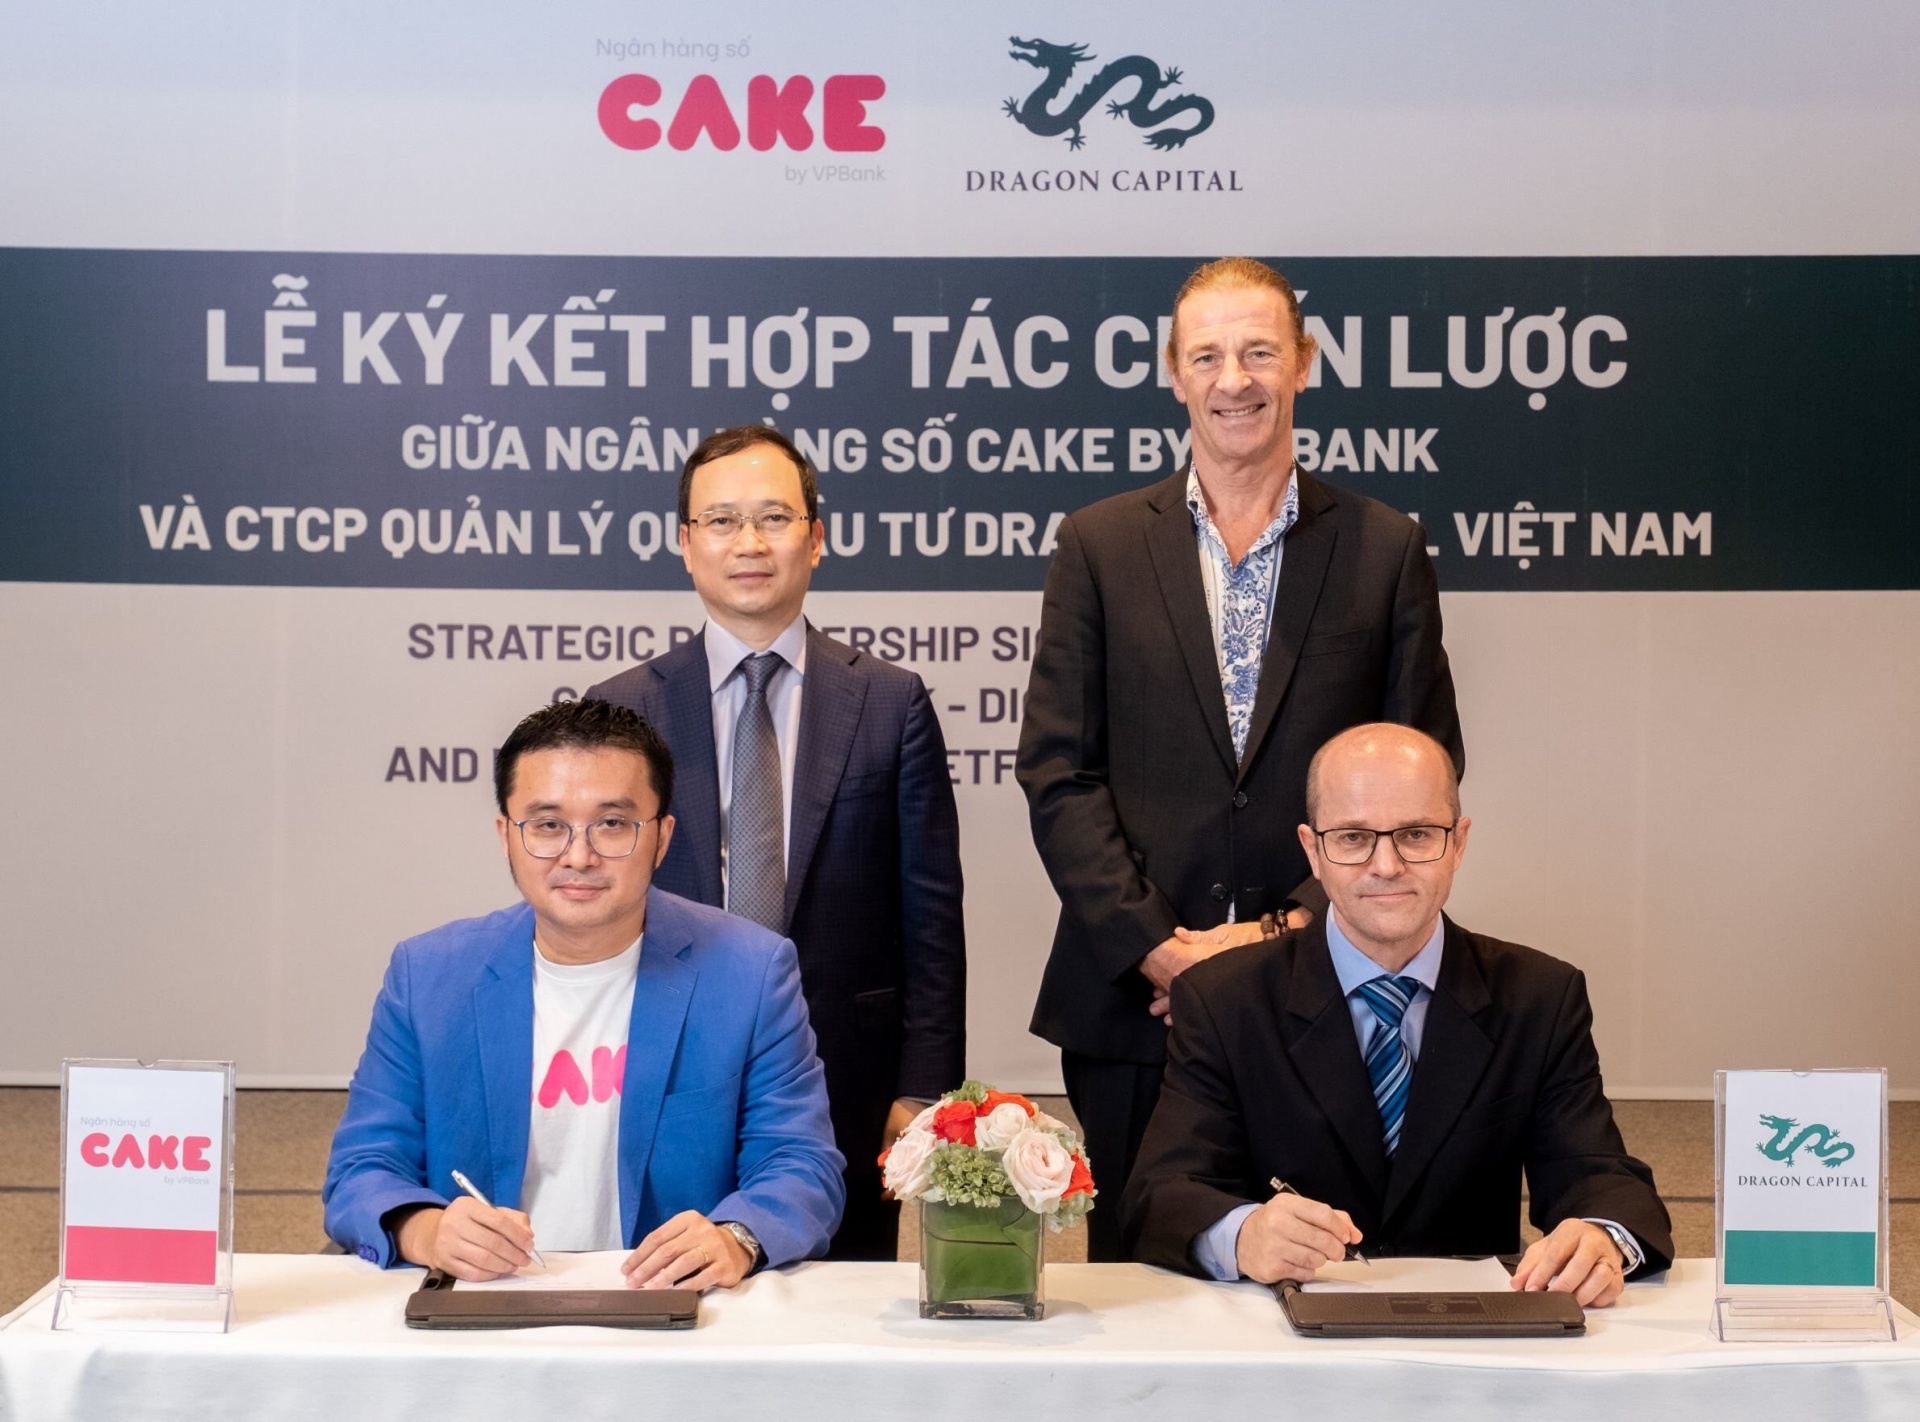 CAKE by VPBank signs partnership with Dragon Capital for micro-investment product